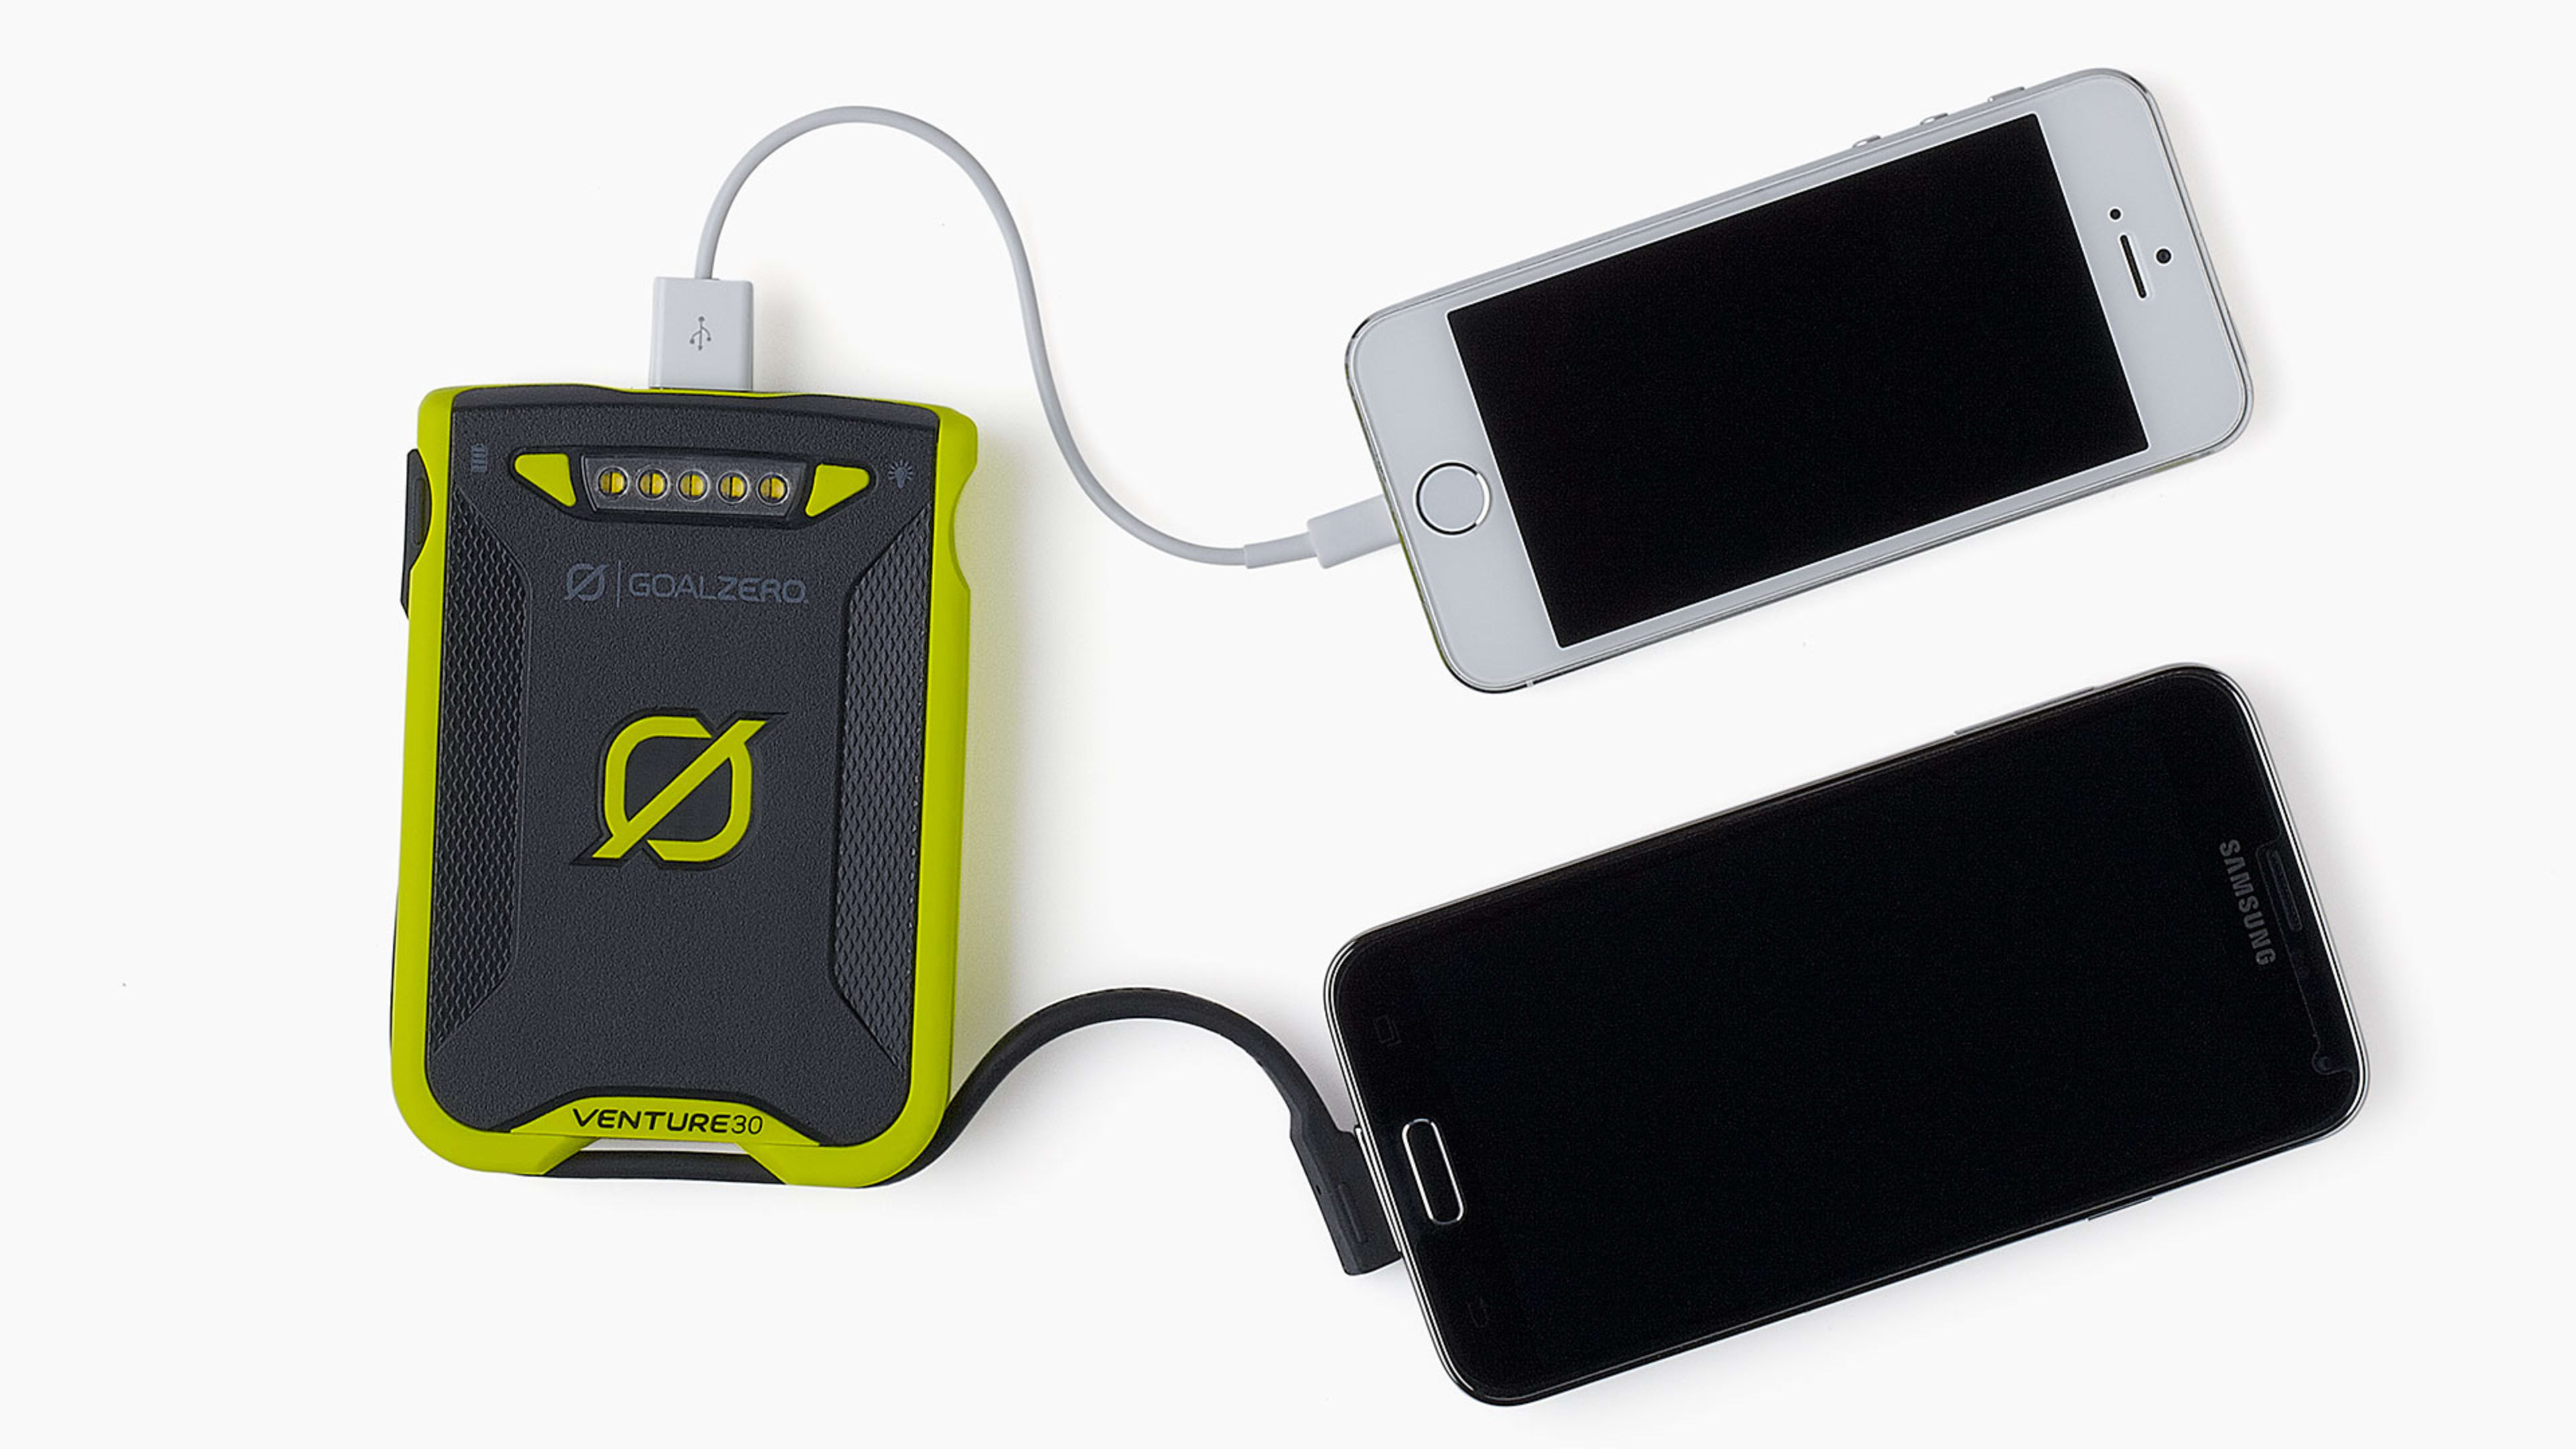 Chargeable Waterproof Batteries Can Bring Solar Power Anywhere